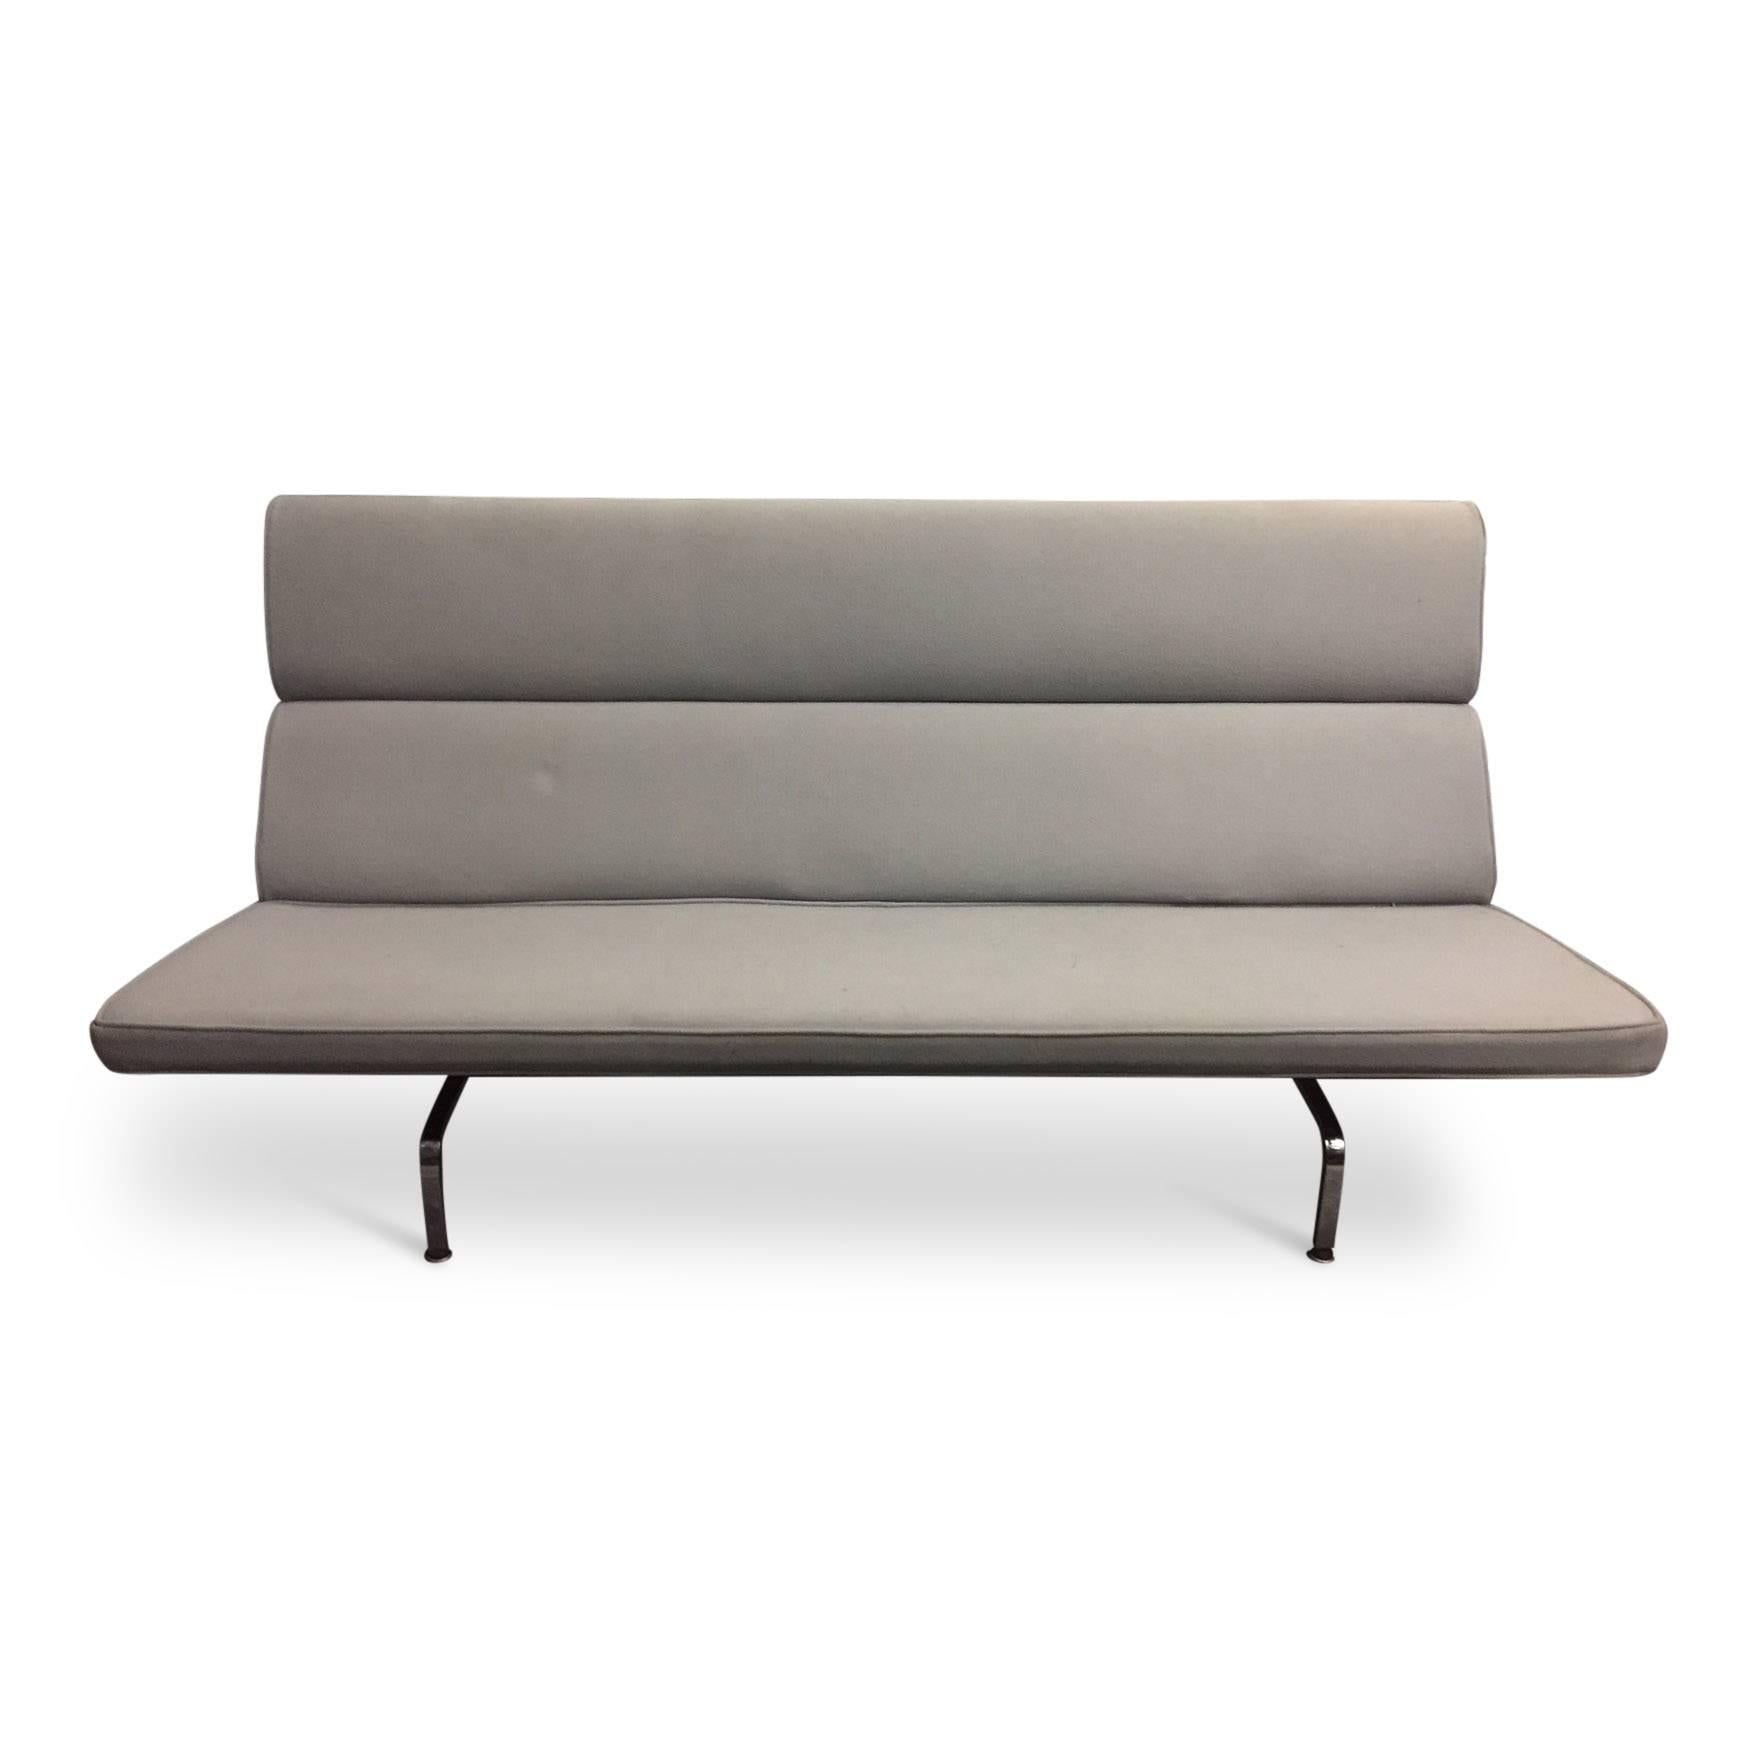 For your consideration is an Eames compact sofa for Herman Miller, upholstered in a grey felt. The slim lines and narrow form of this sofa give it a light and airy feel, excellent for both tight apartments and open spaces alike. Like many of the